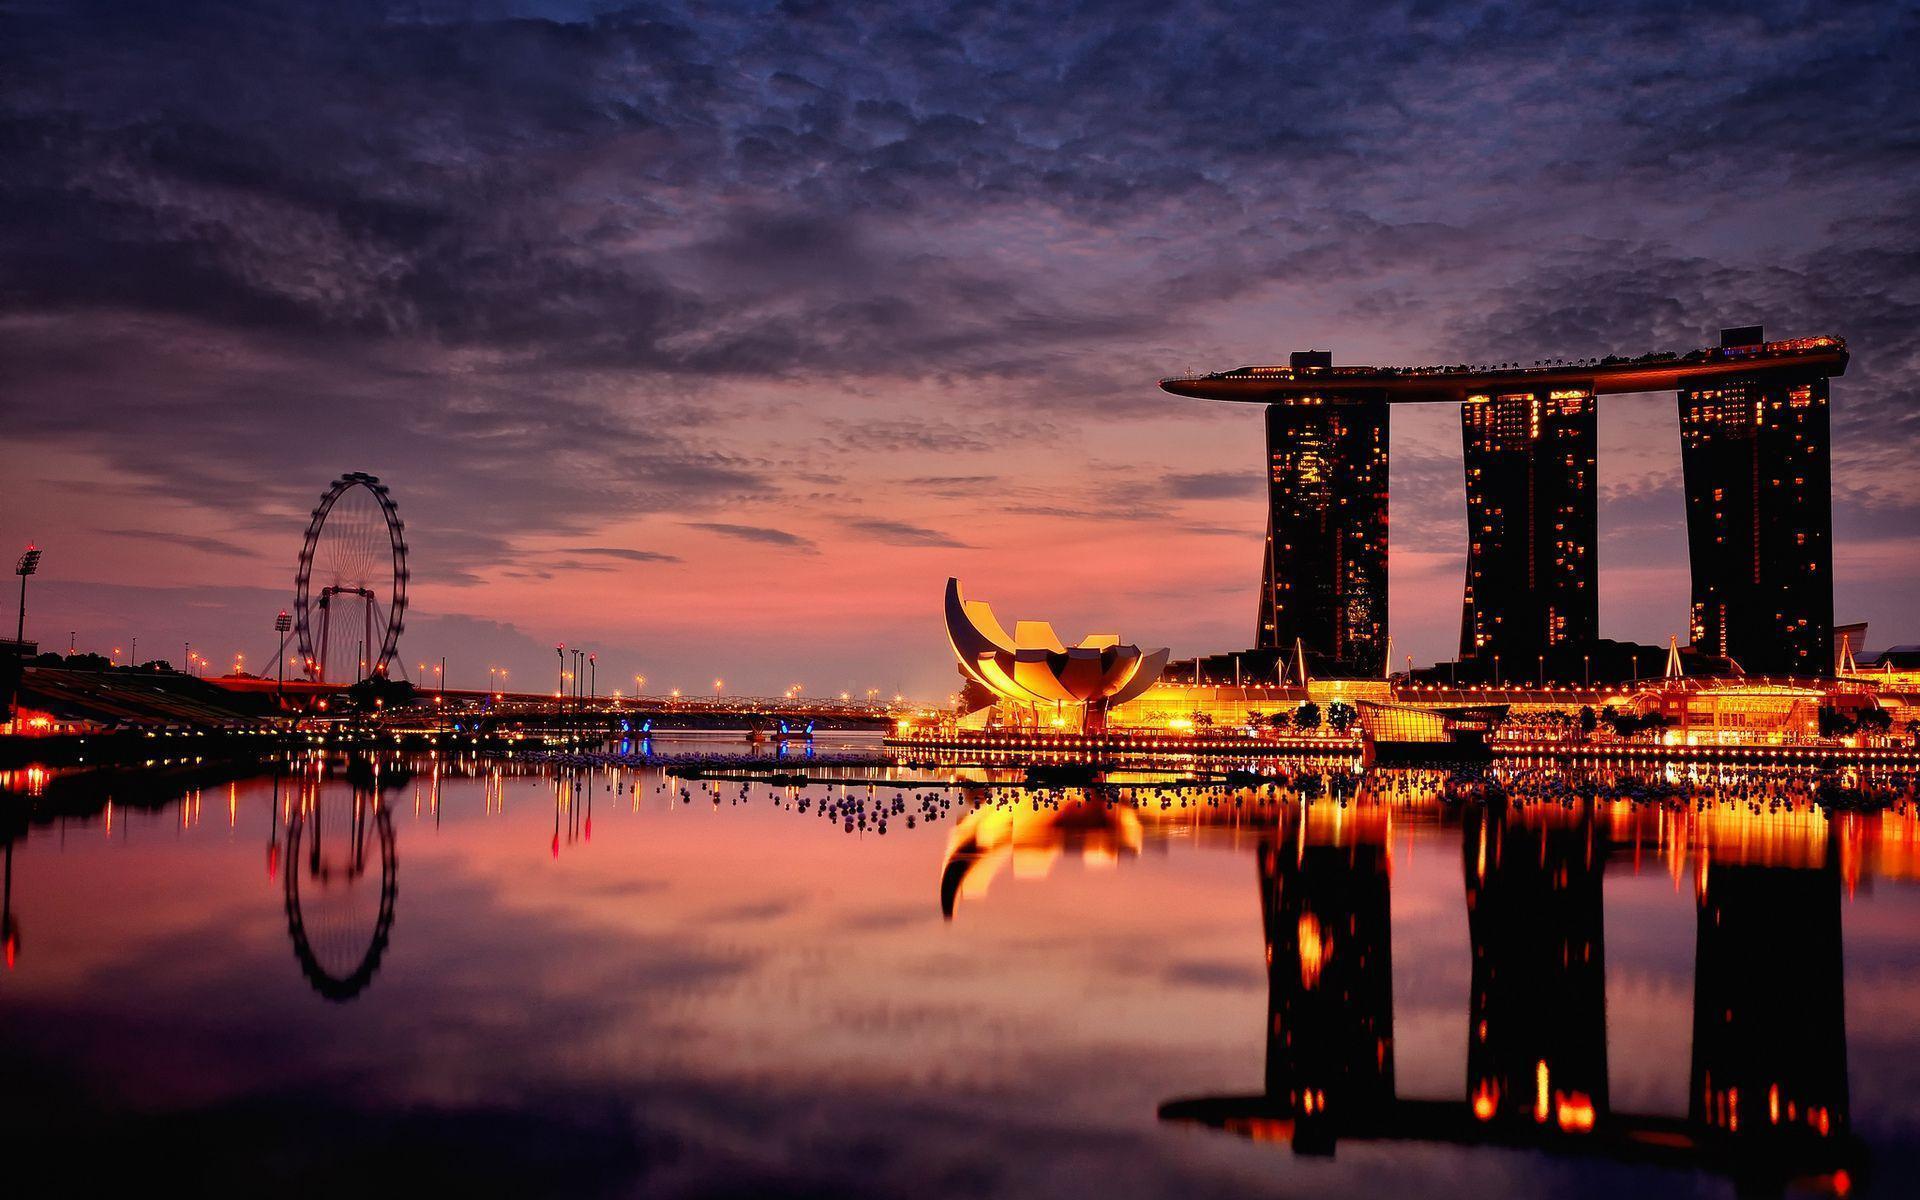 Relaxing view of Singapores reflection in the water at night 4K wallpaper  download